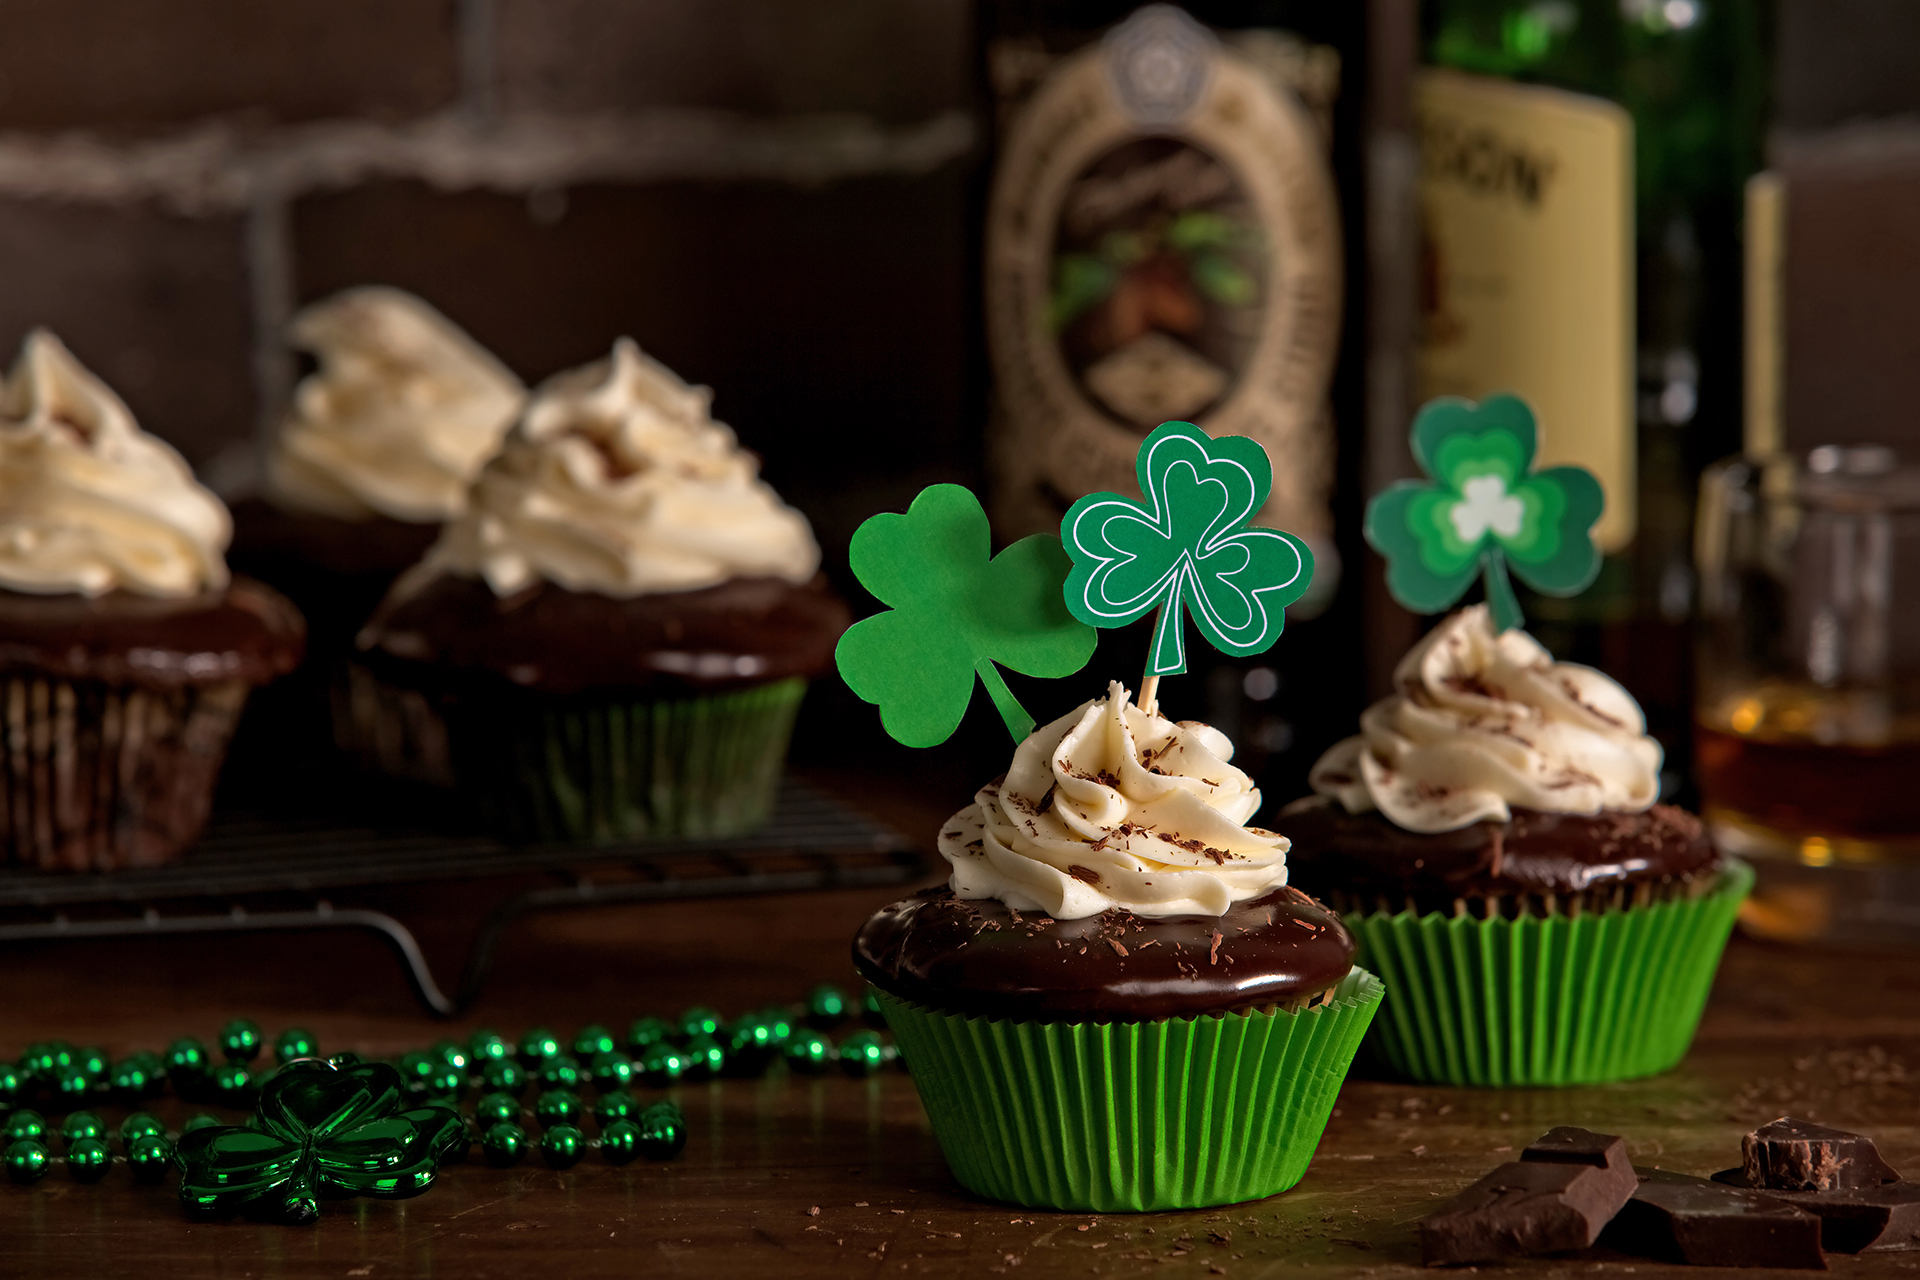 Chocolate Irish stout cupcakes with shamrock clover cake toppers